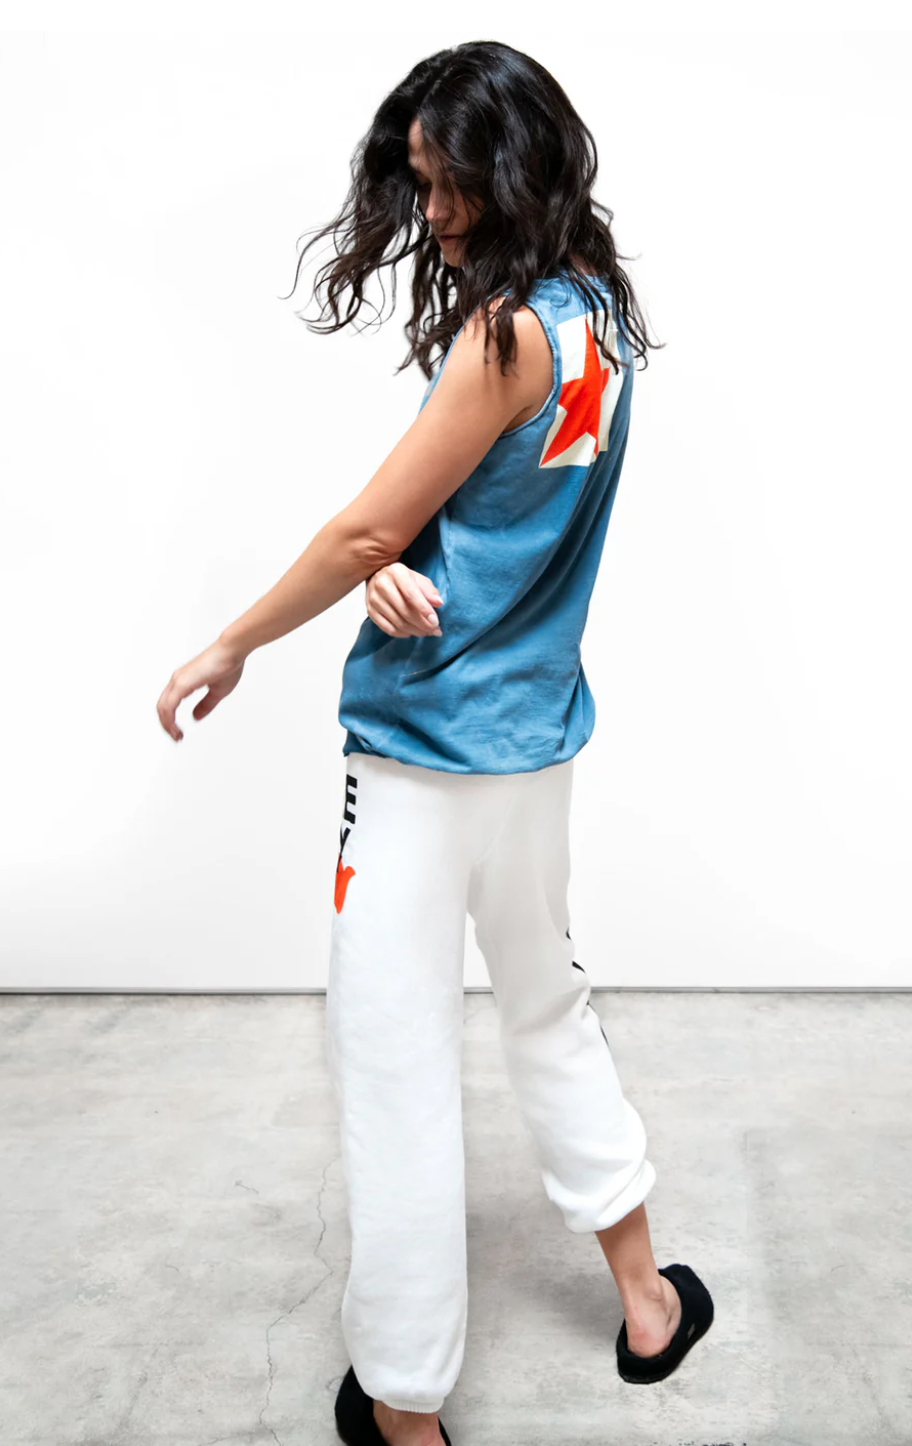 A woman with long dark hair dances joyfully, wearing a Free City (sparrow, LLC) GOLDEN SIGN/STAR BIGGY tank/lux rib with a lightning bolt design and white sweatpants, against a plain white background in Arizona style.